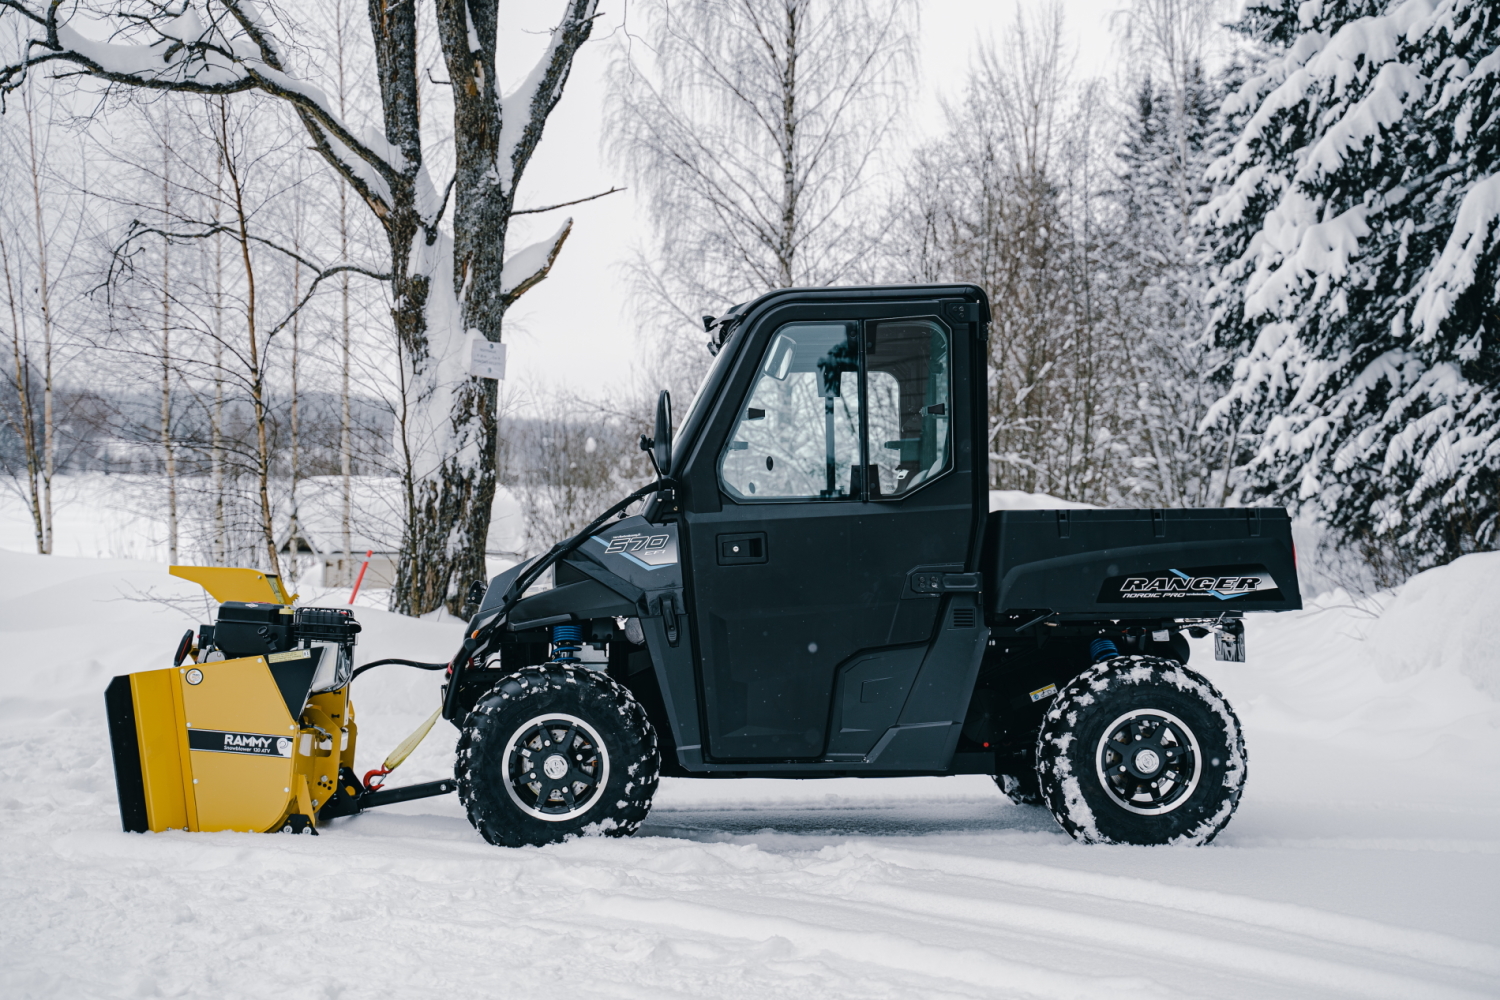 2023 RAMMY Snowblower - 155 UTV for sale in the Pompano Beach, FL area. Get the best drive out price on 2023 RAMMY Snowblower - 155 UTV and compare.